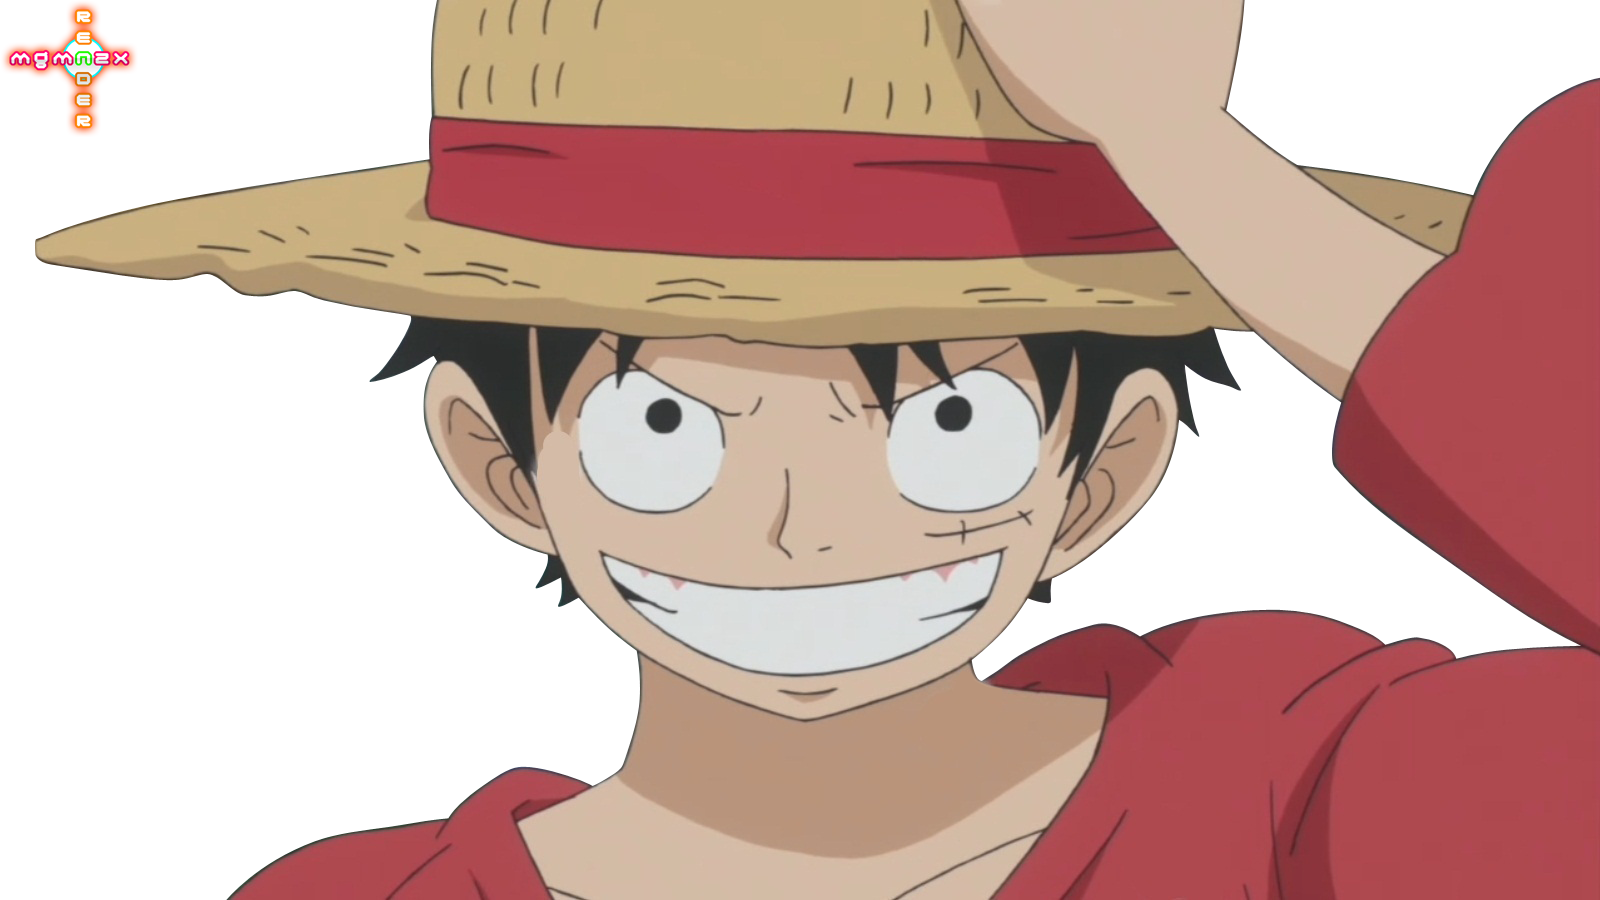 Luffy Png Cute